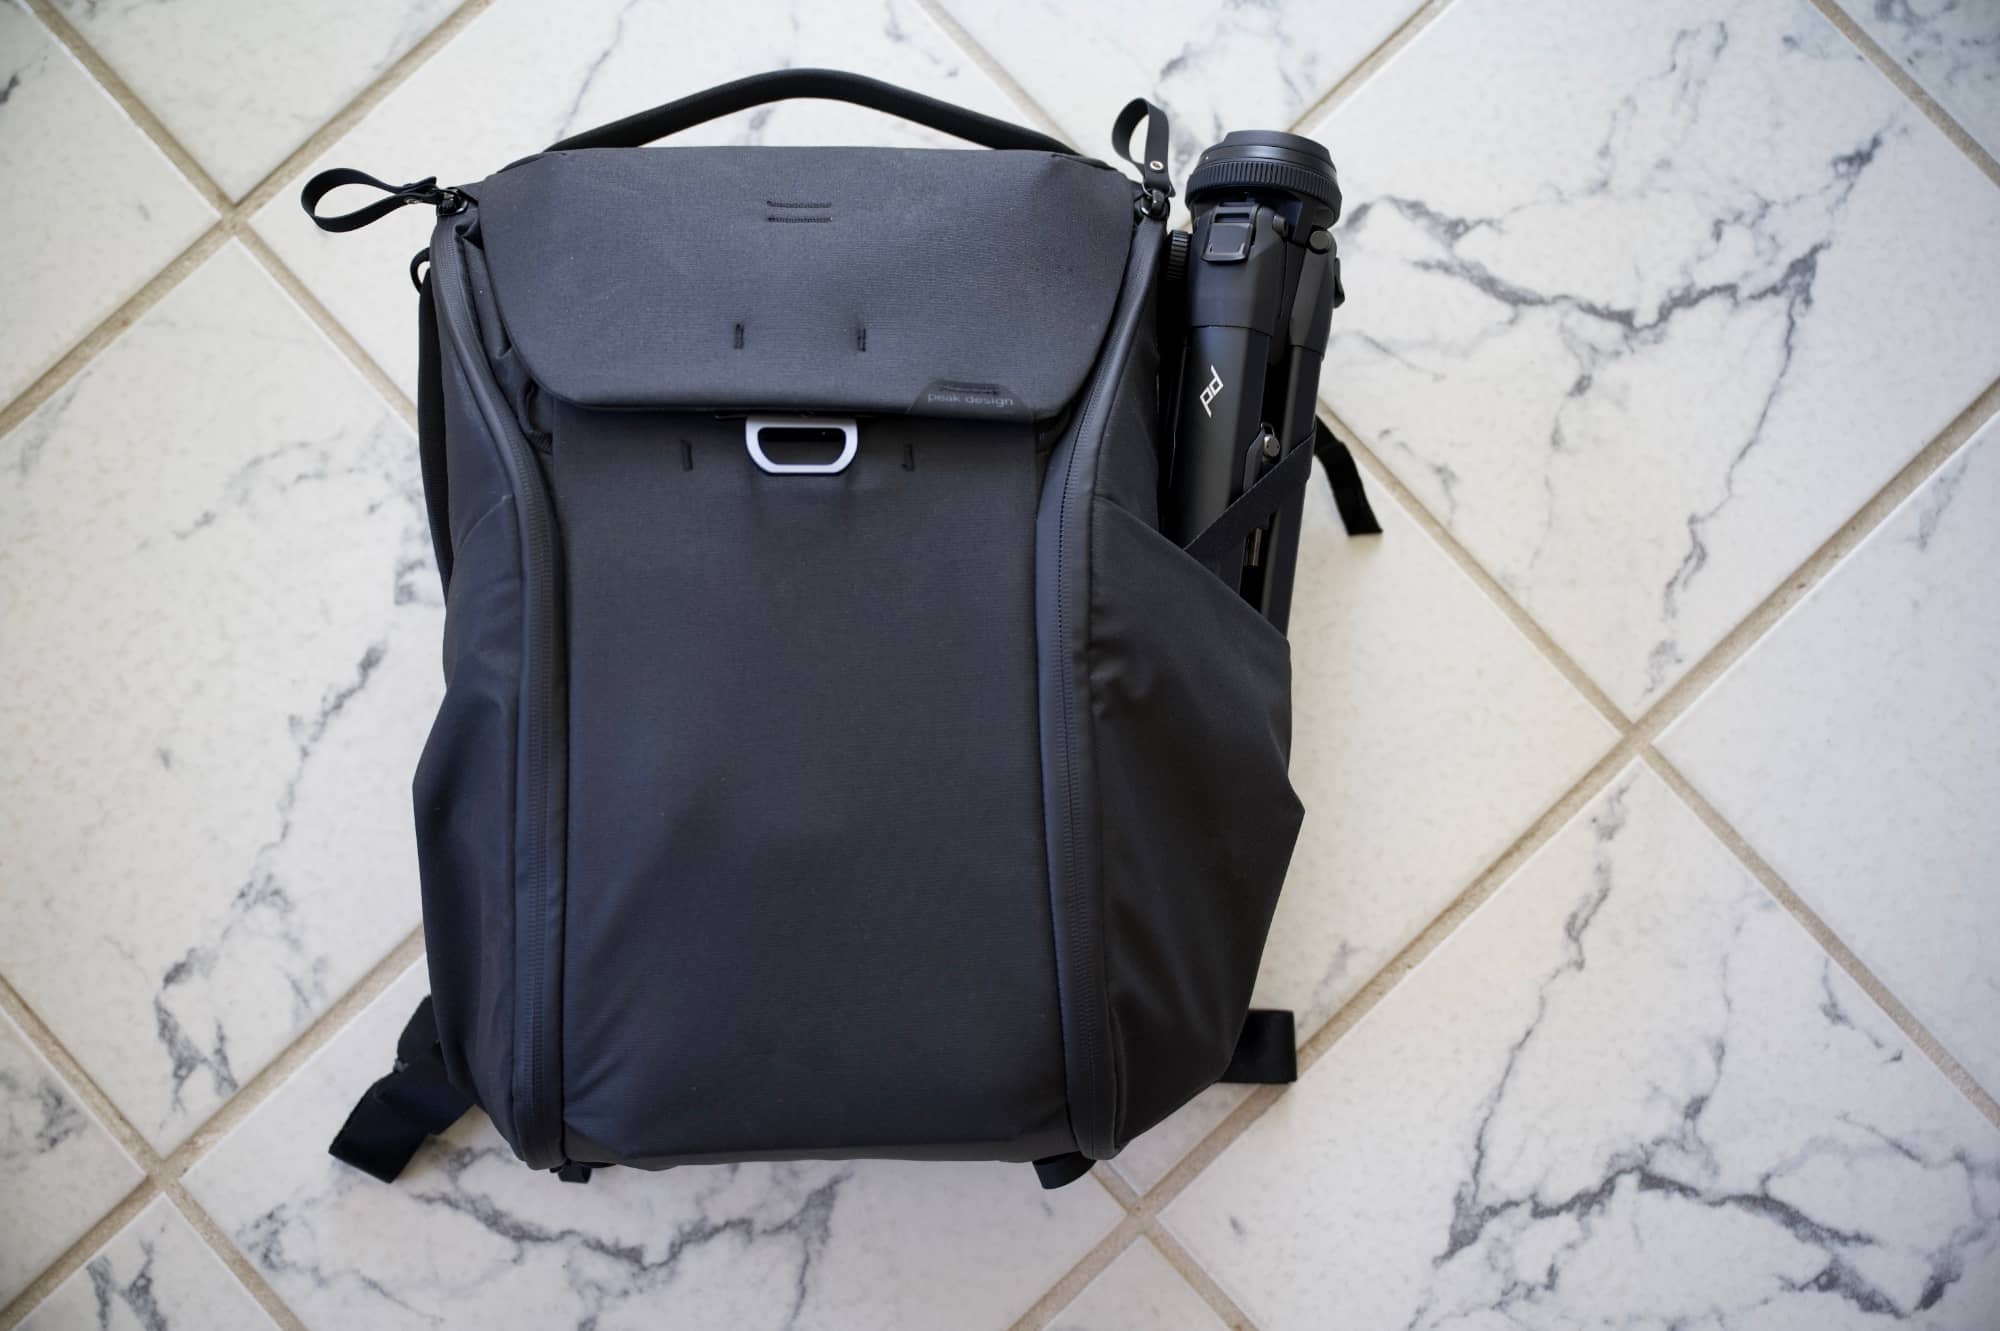 Peak Design Everyday Backpack with Tripod.